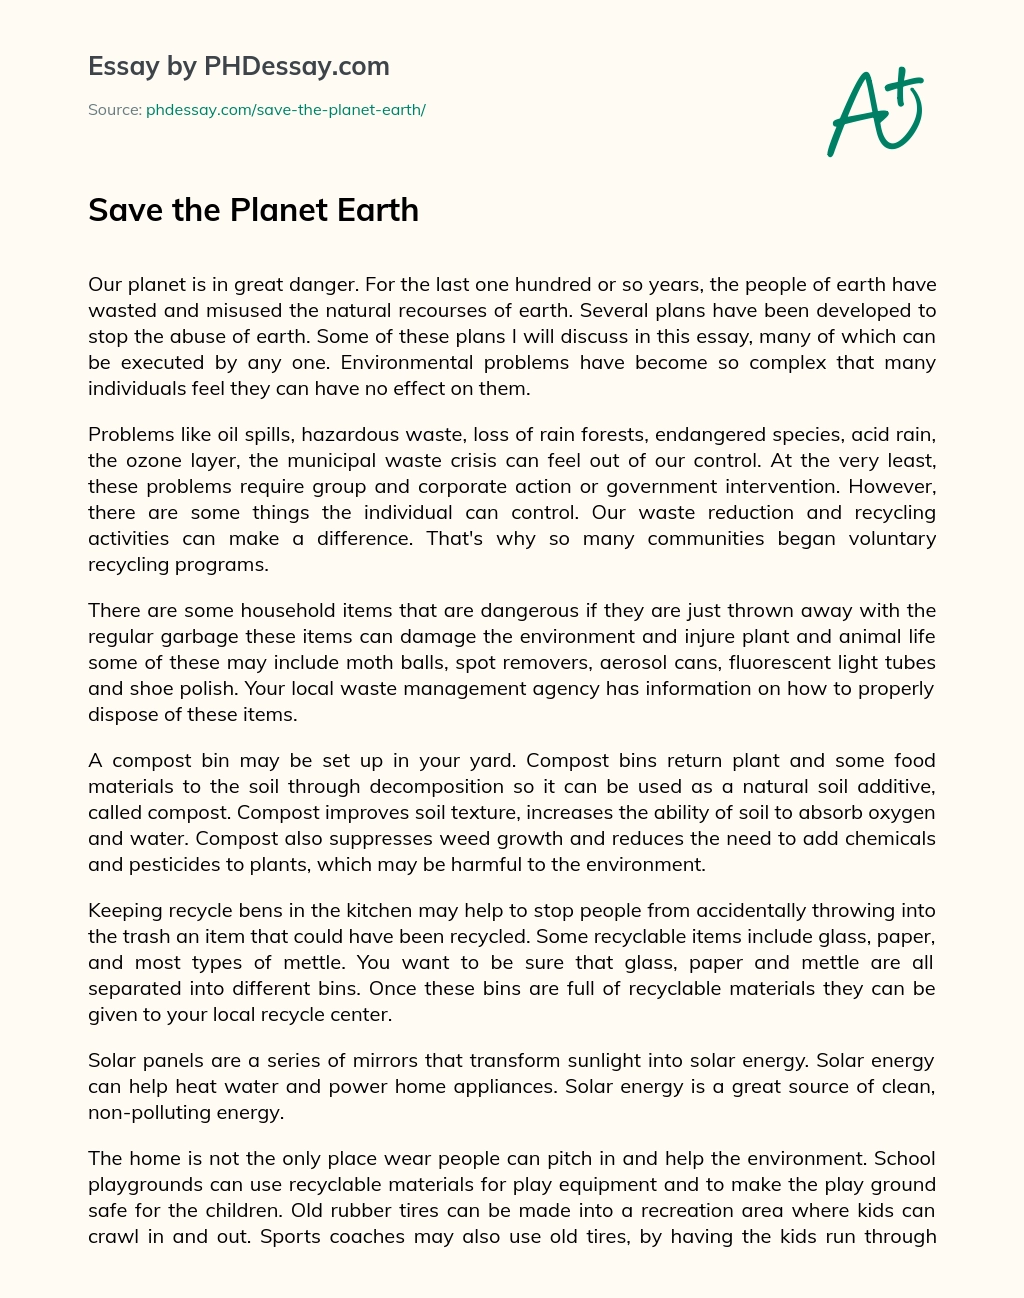 save the planet essay writing